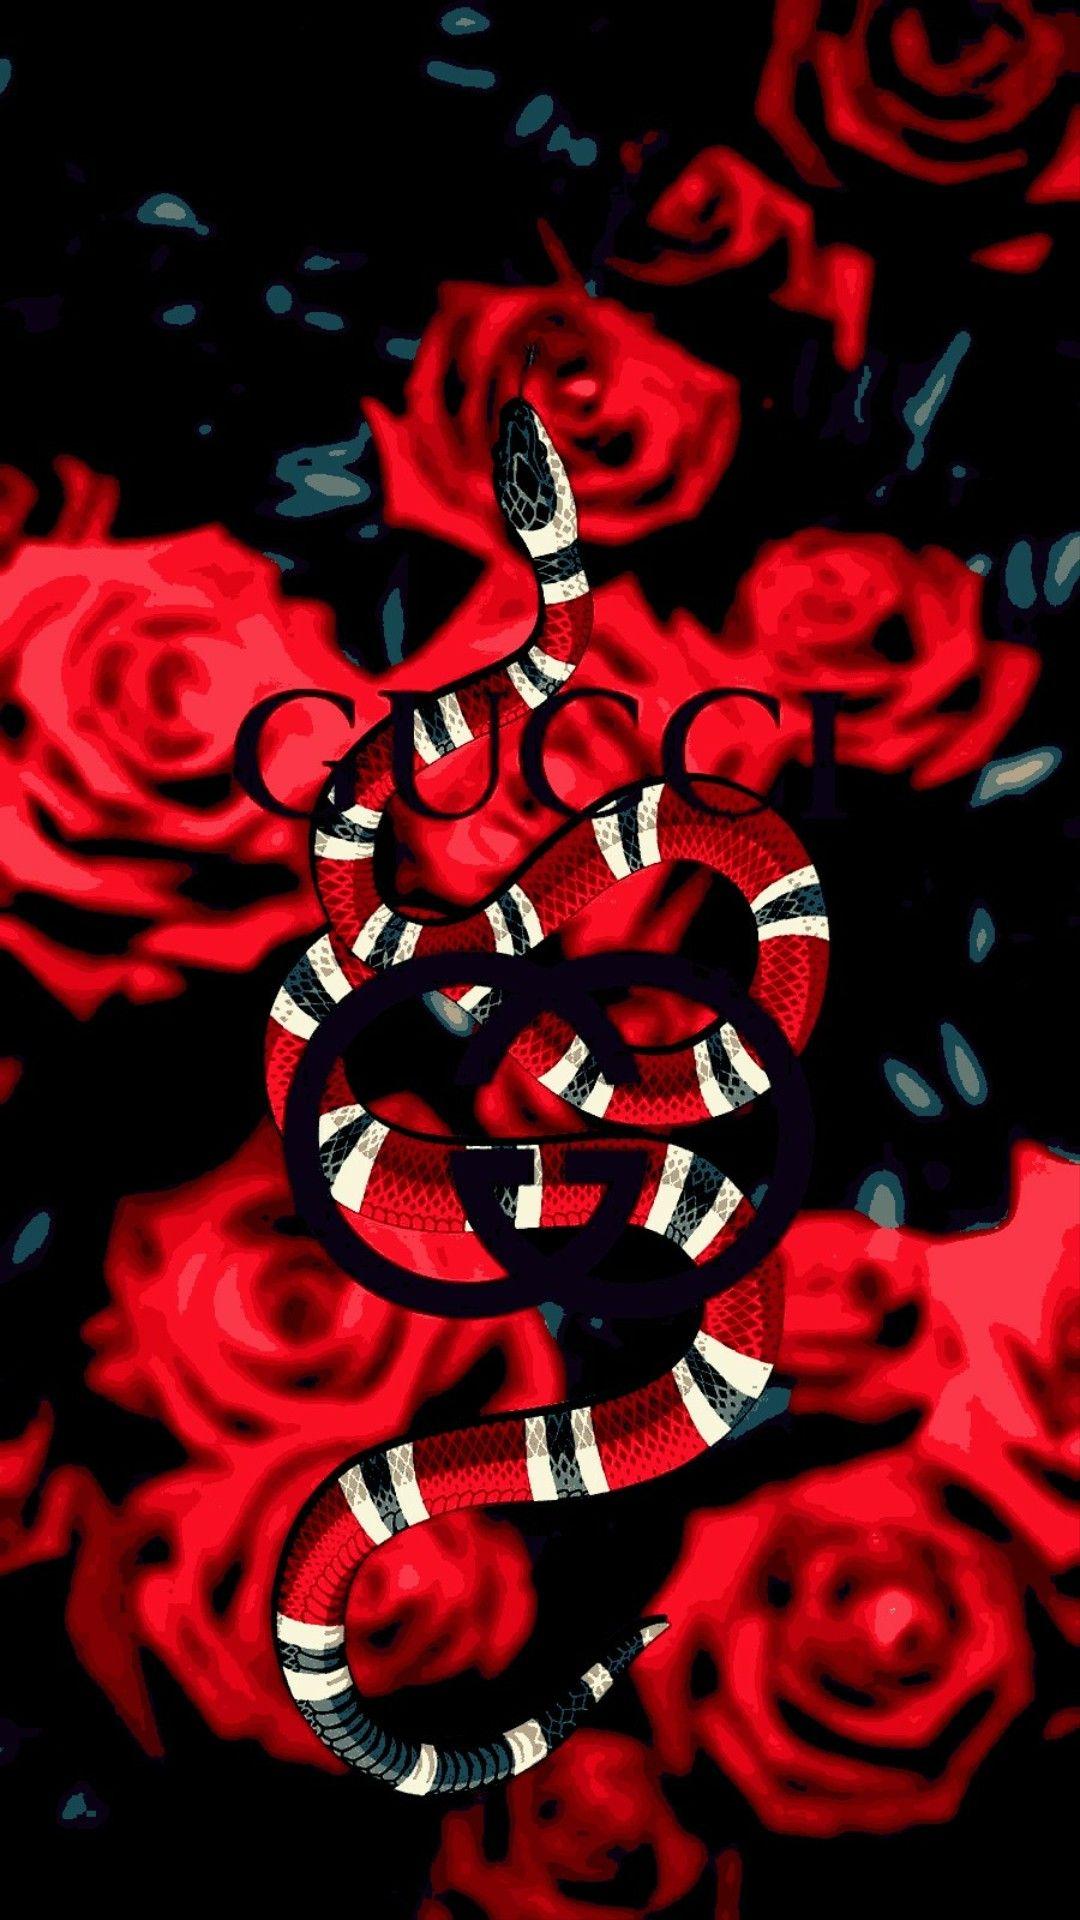 Roses of Gucci Snake. Gucci wallpaper iphone, Hypebeast wallpaper, Gold wallpaper iphone